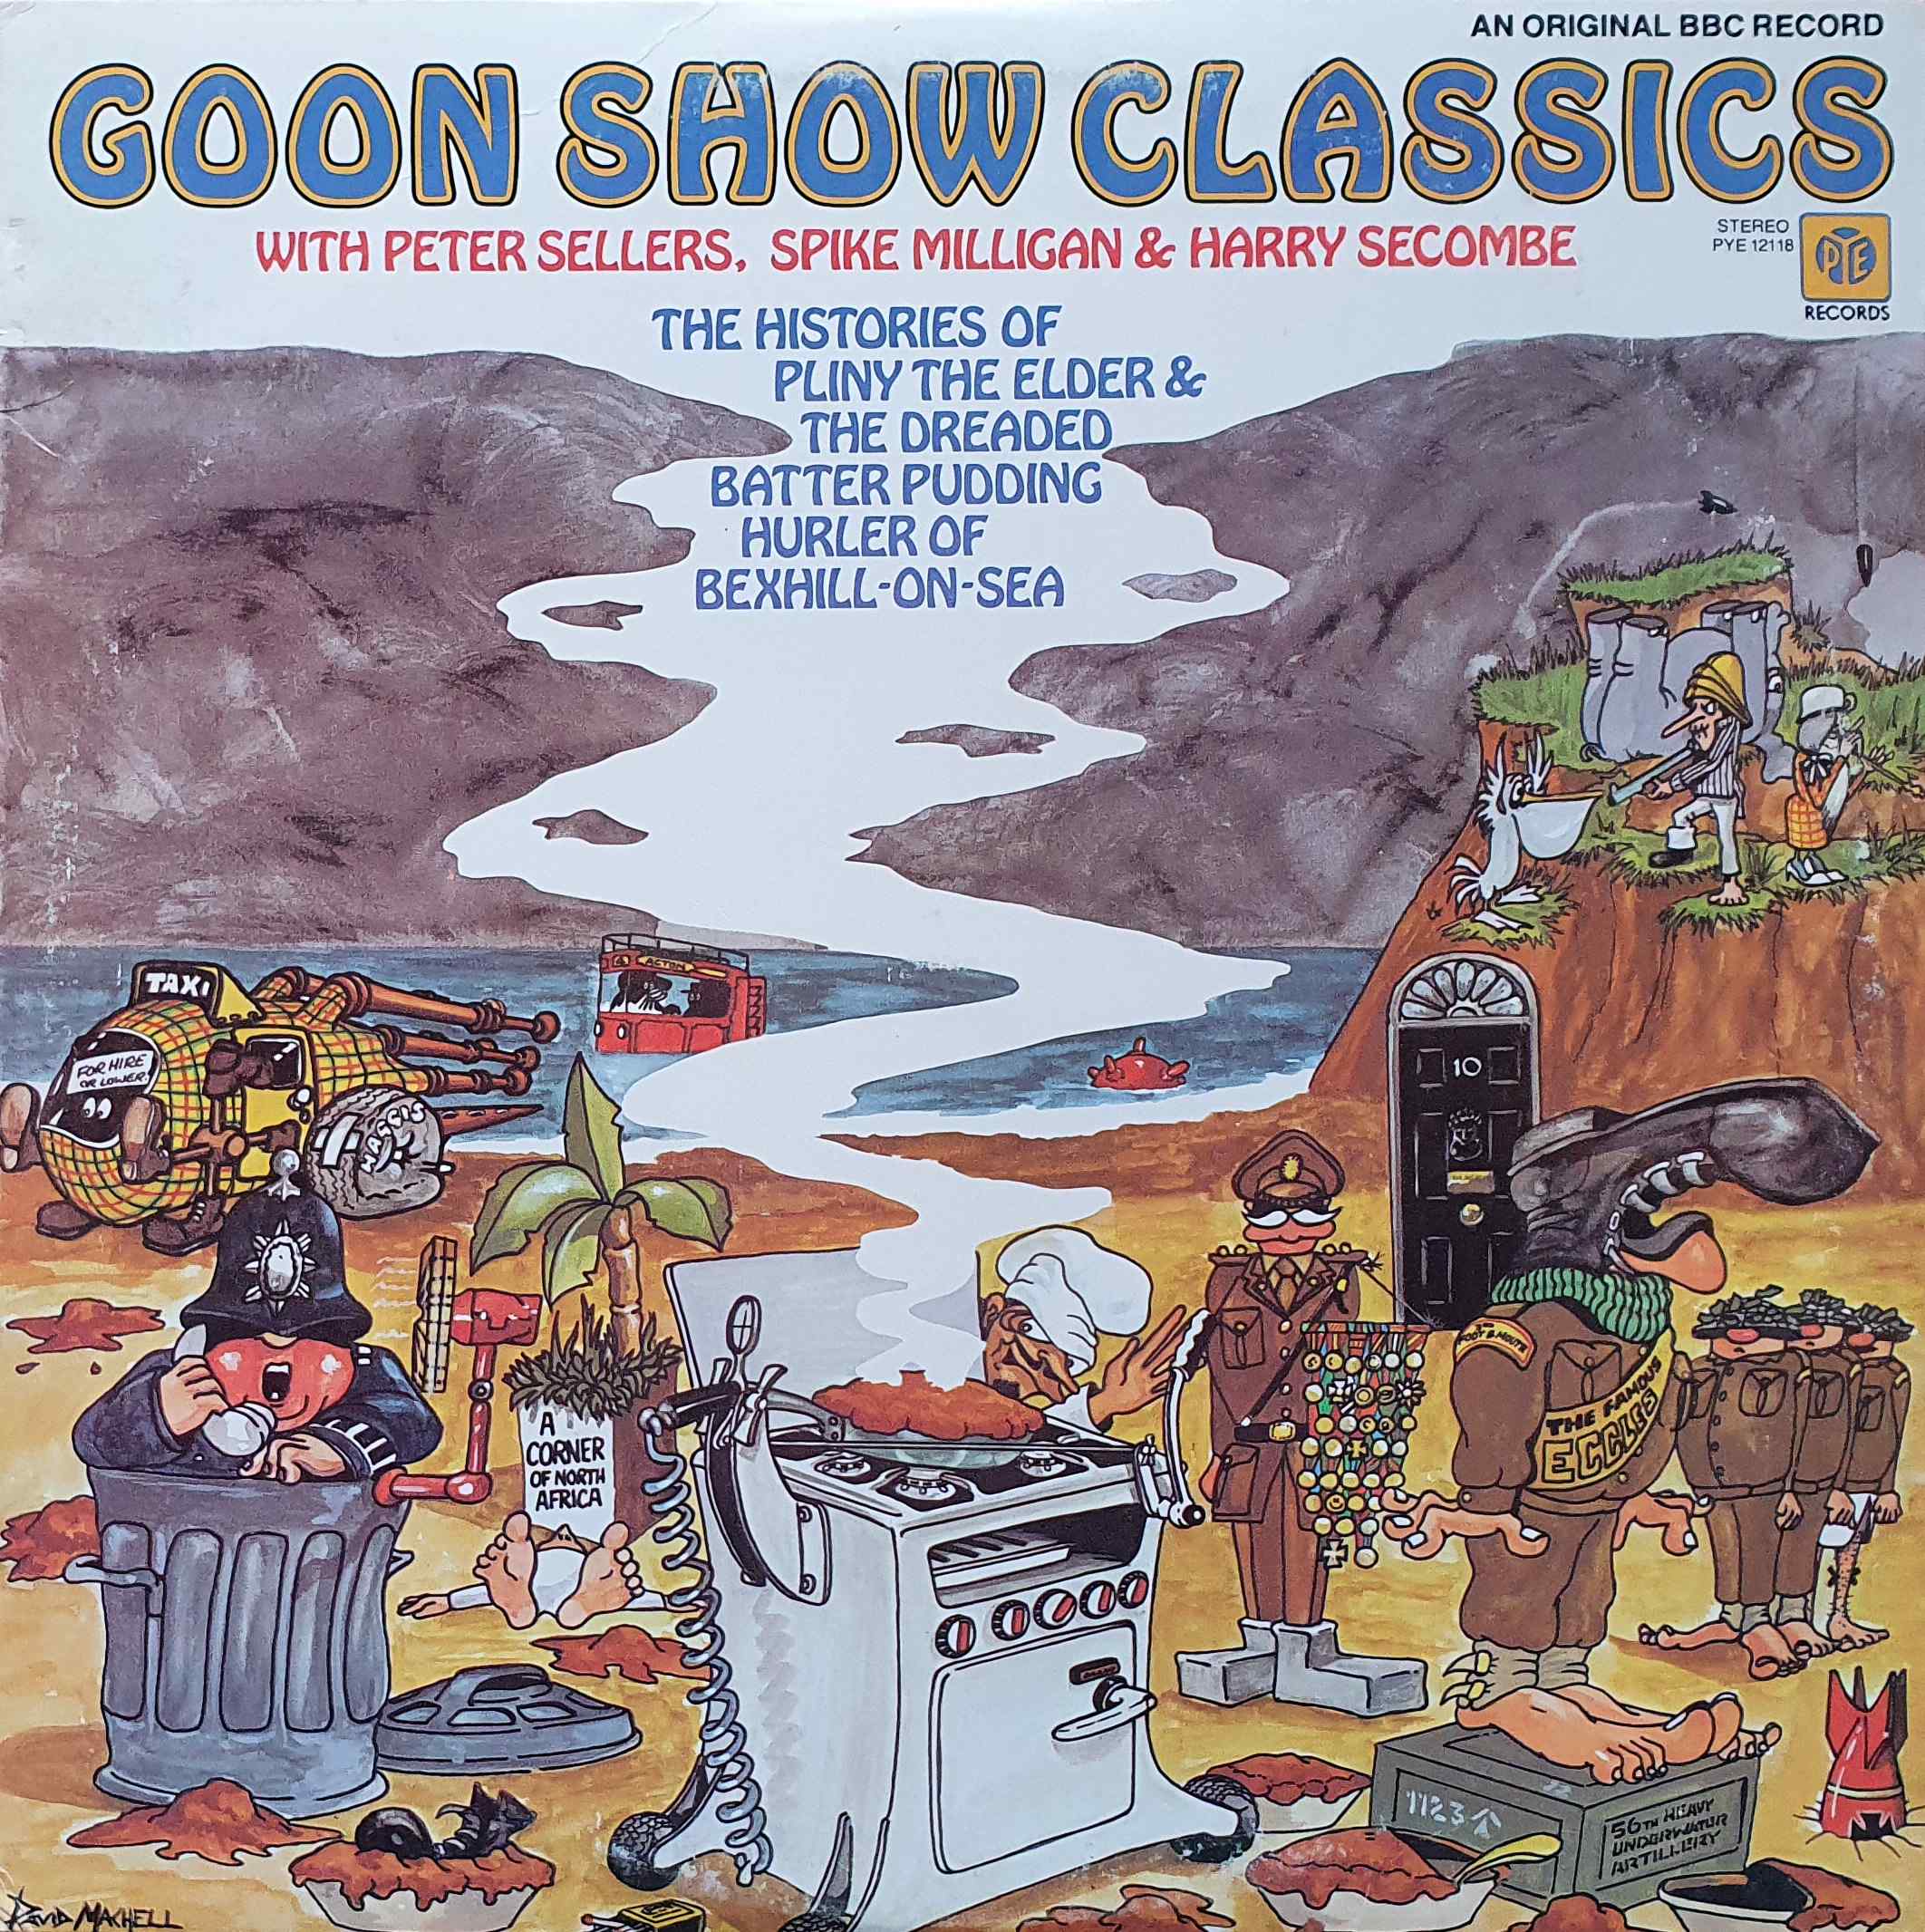 Picture of PYE 12118 Goon Show classics by artist Various from the BBC albums - Records and Tapes library